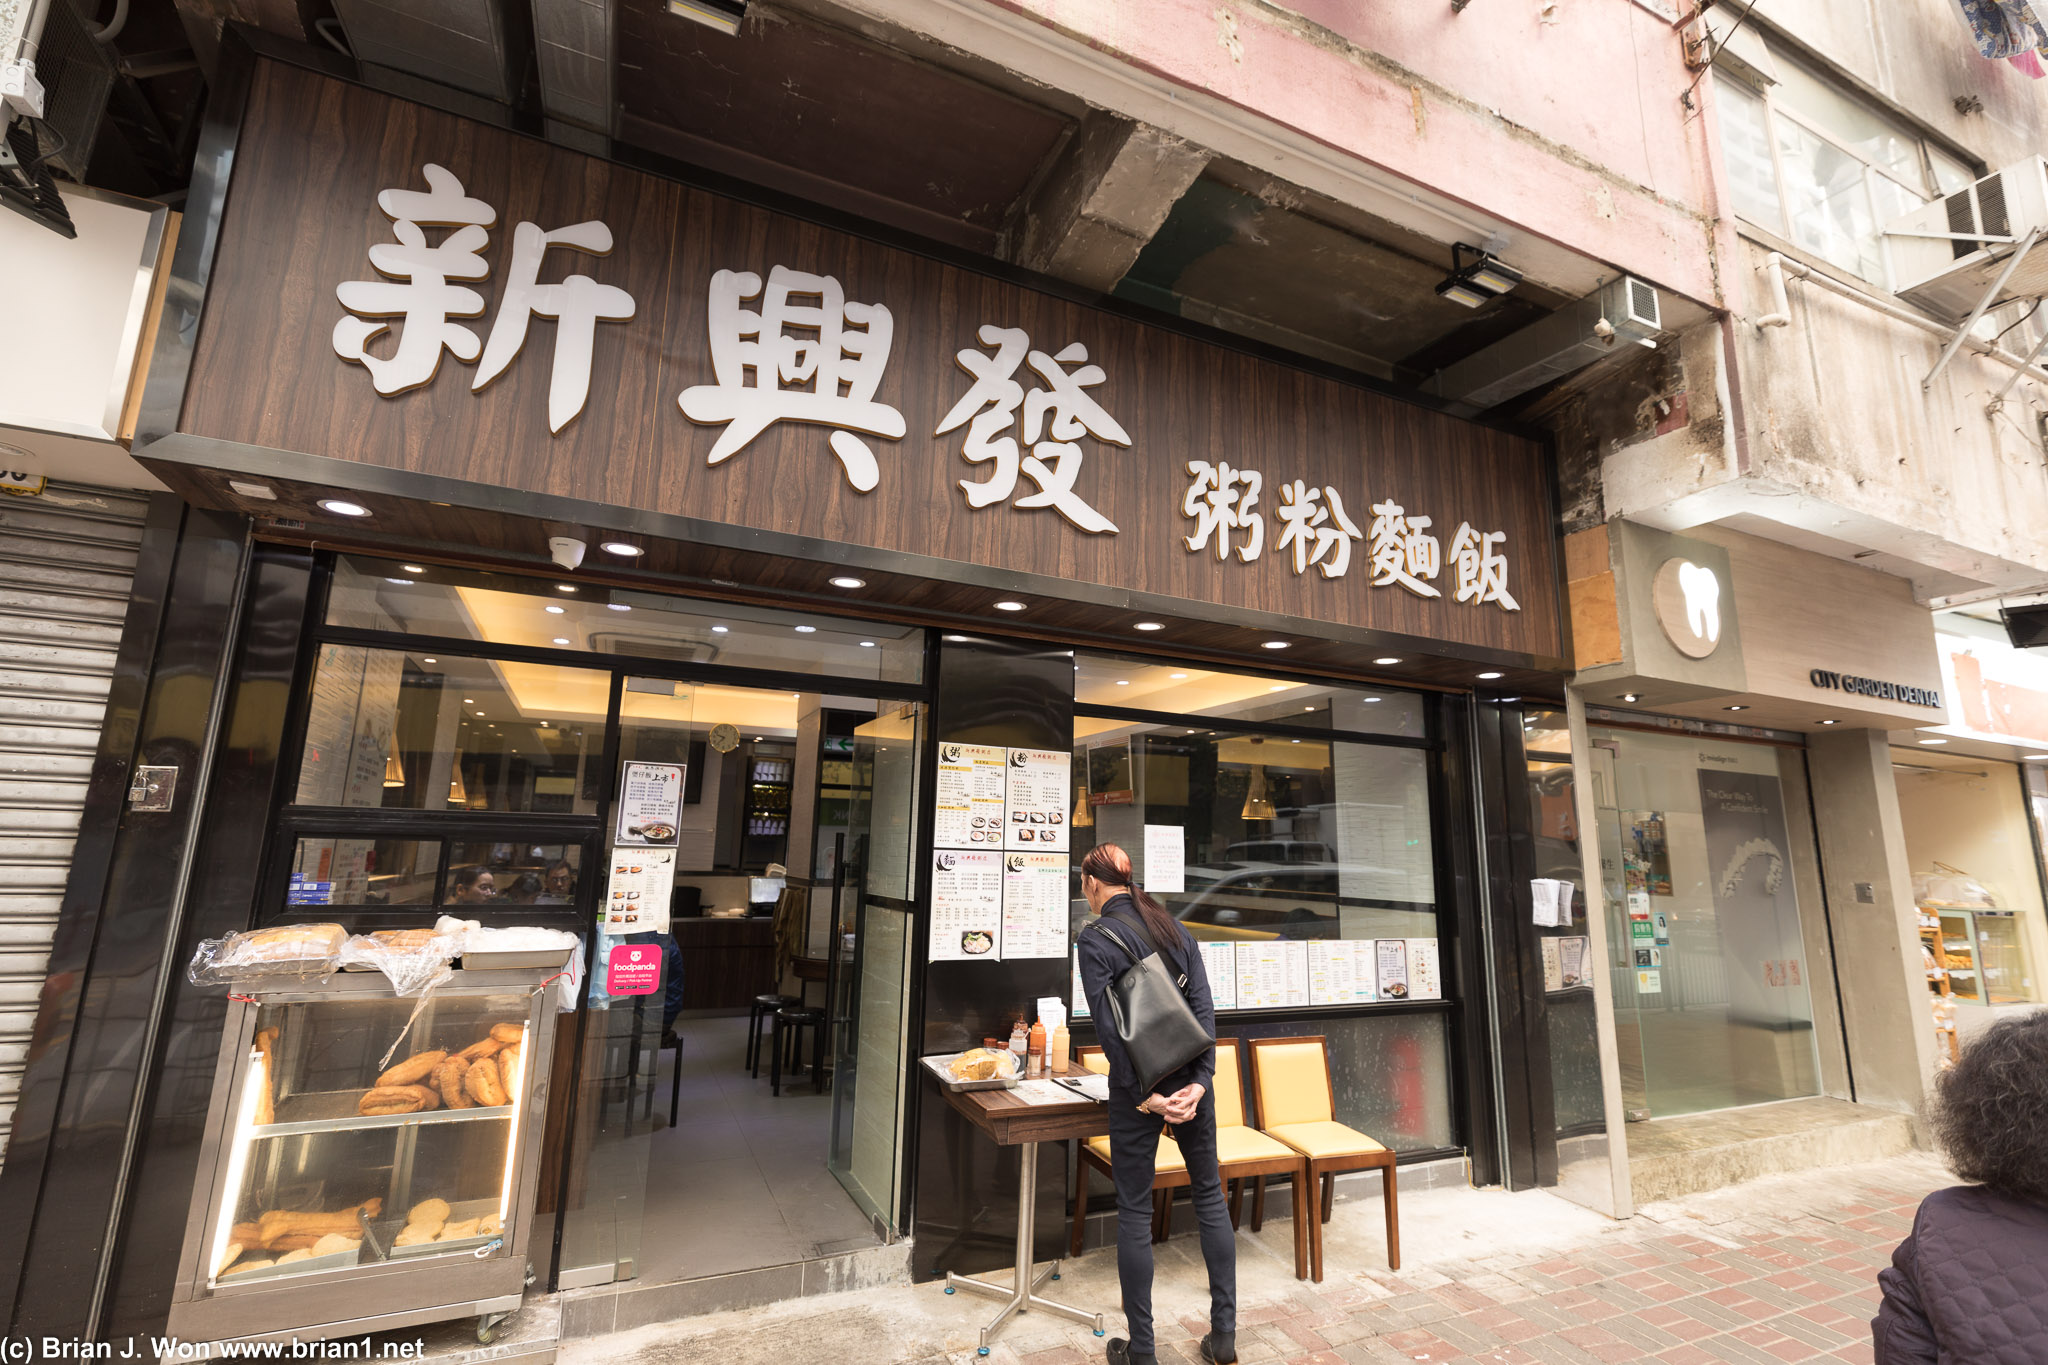 The exterior of Sun Hing Congee.